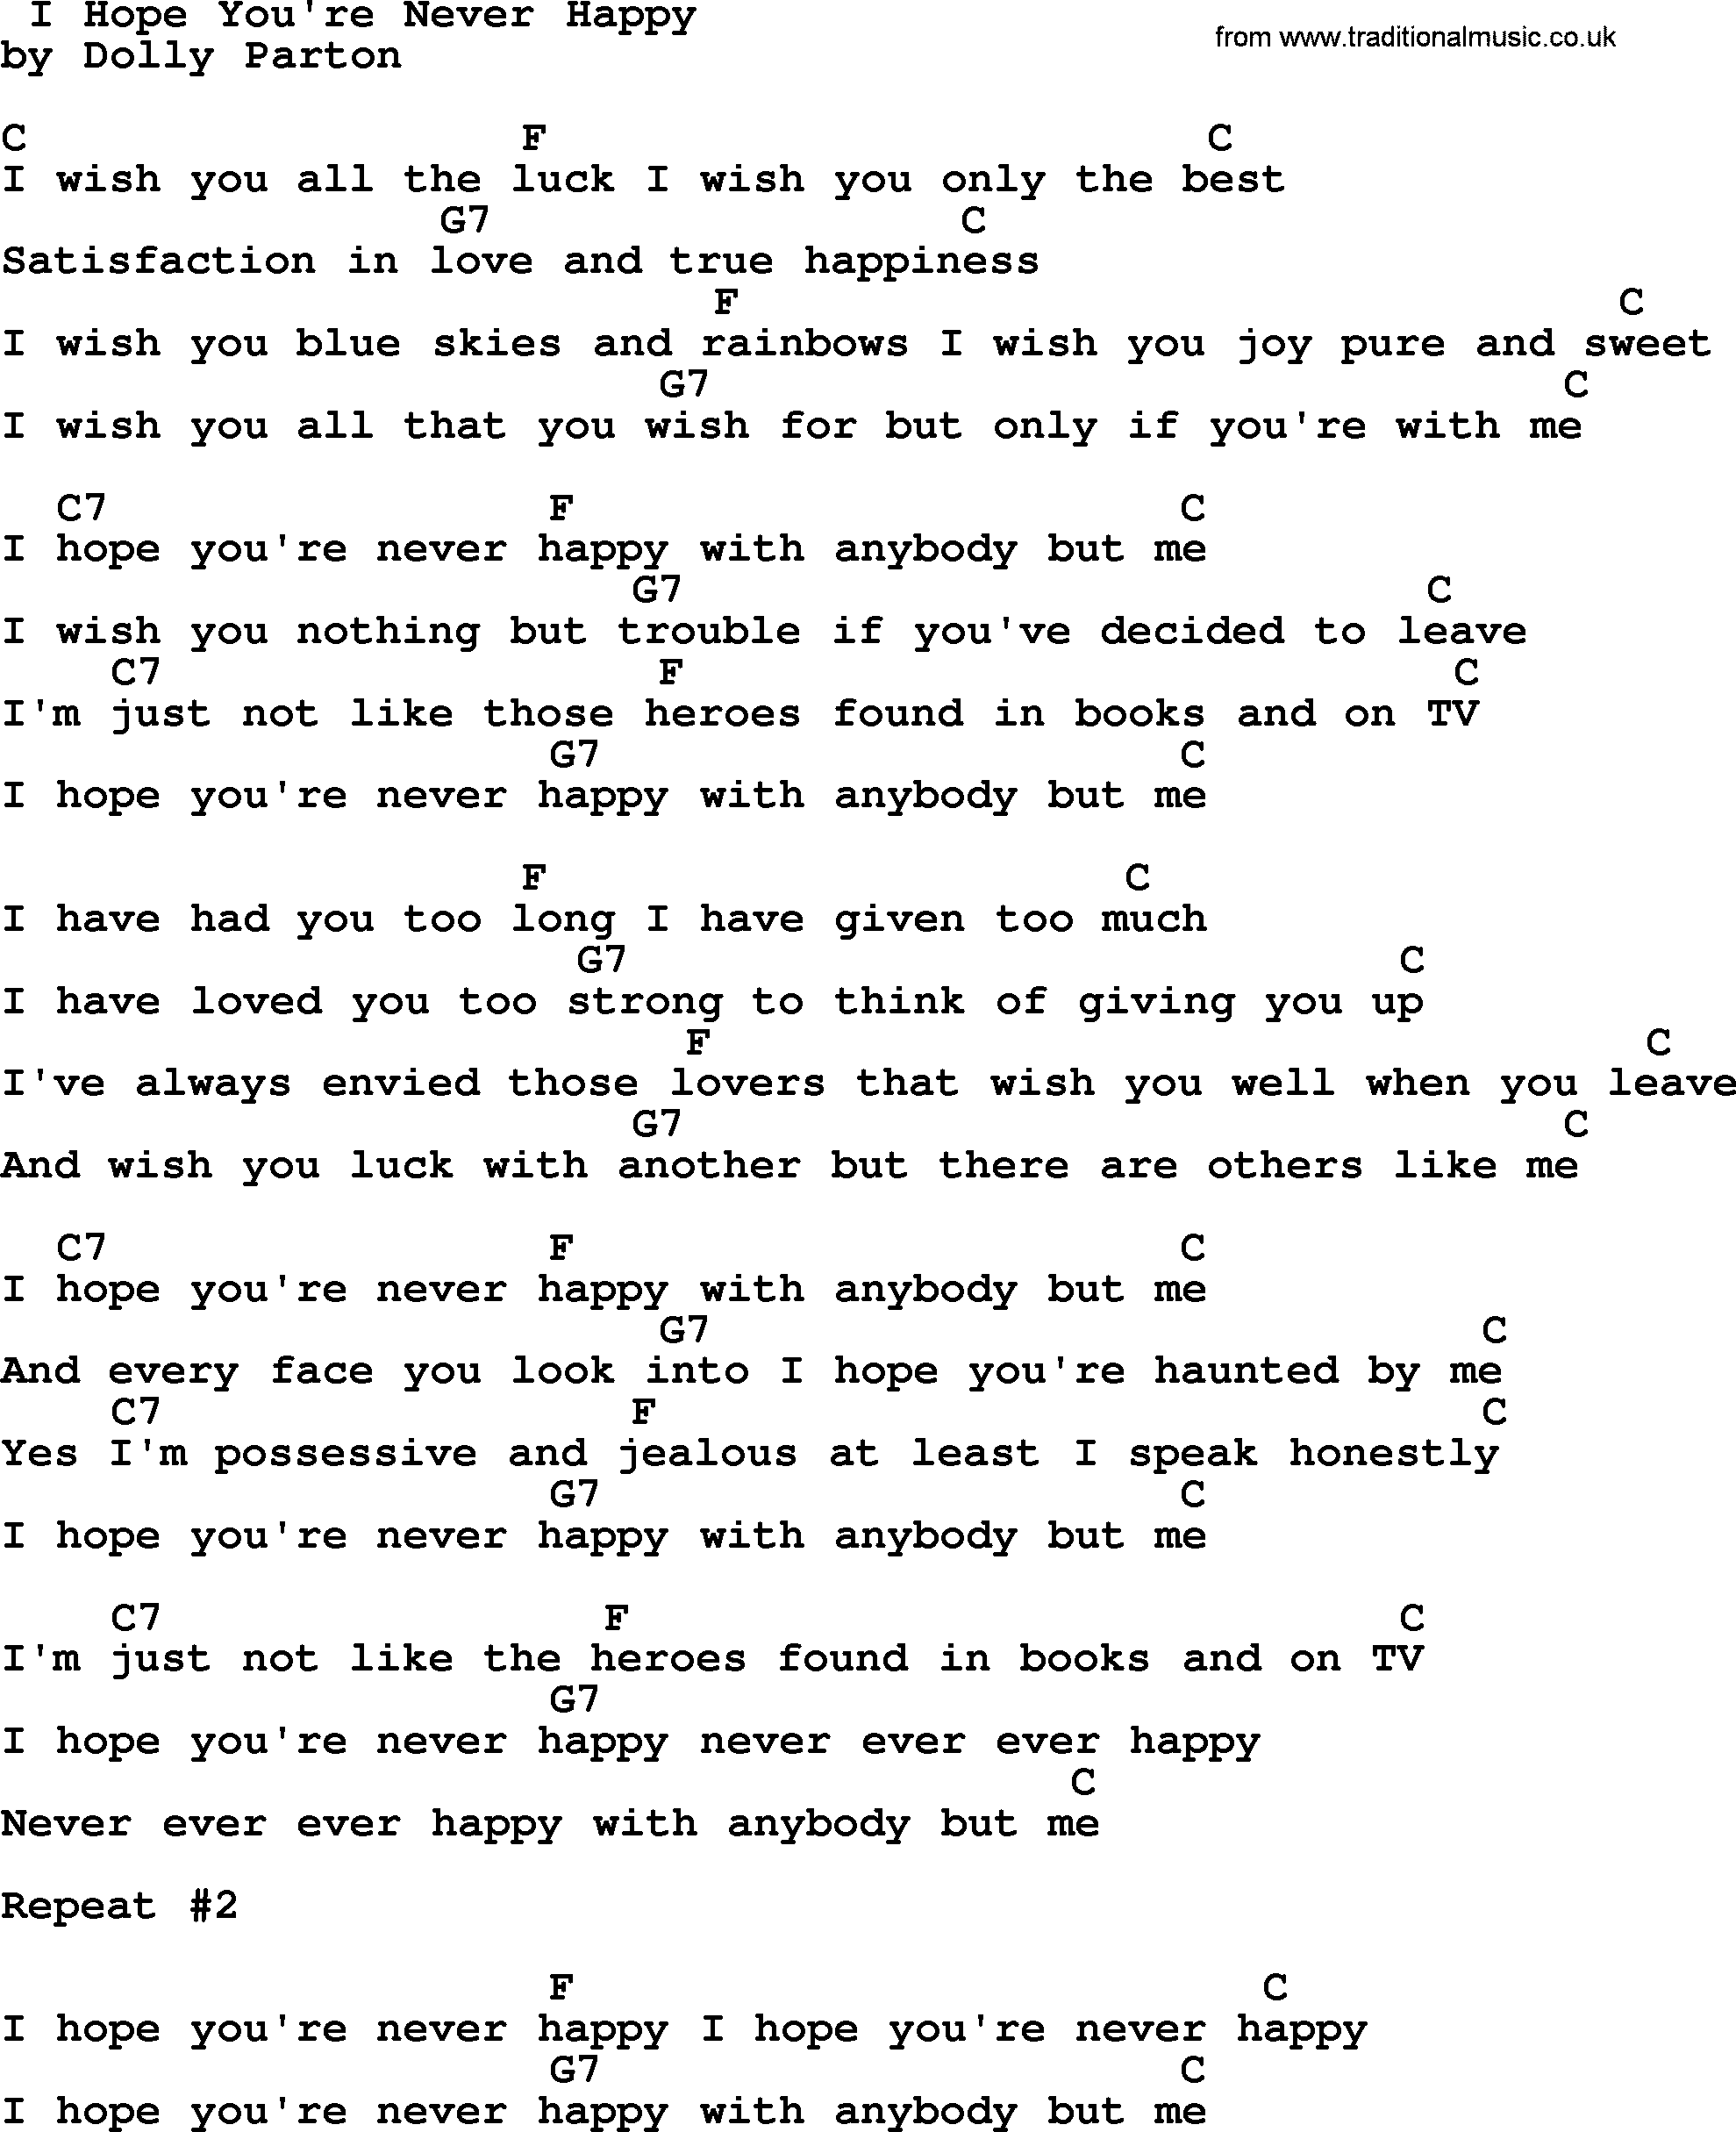 Dolly Parton song I Hope You're Never Happy, lyrics and chords